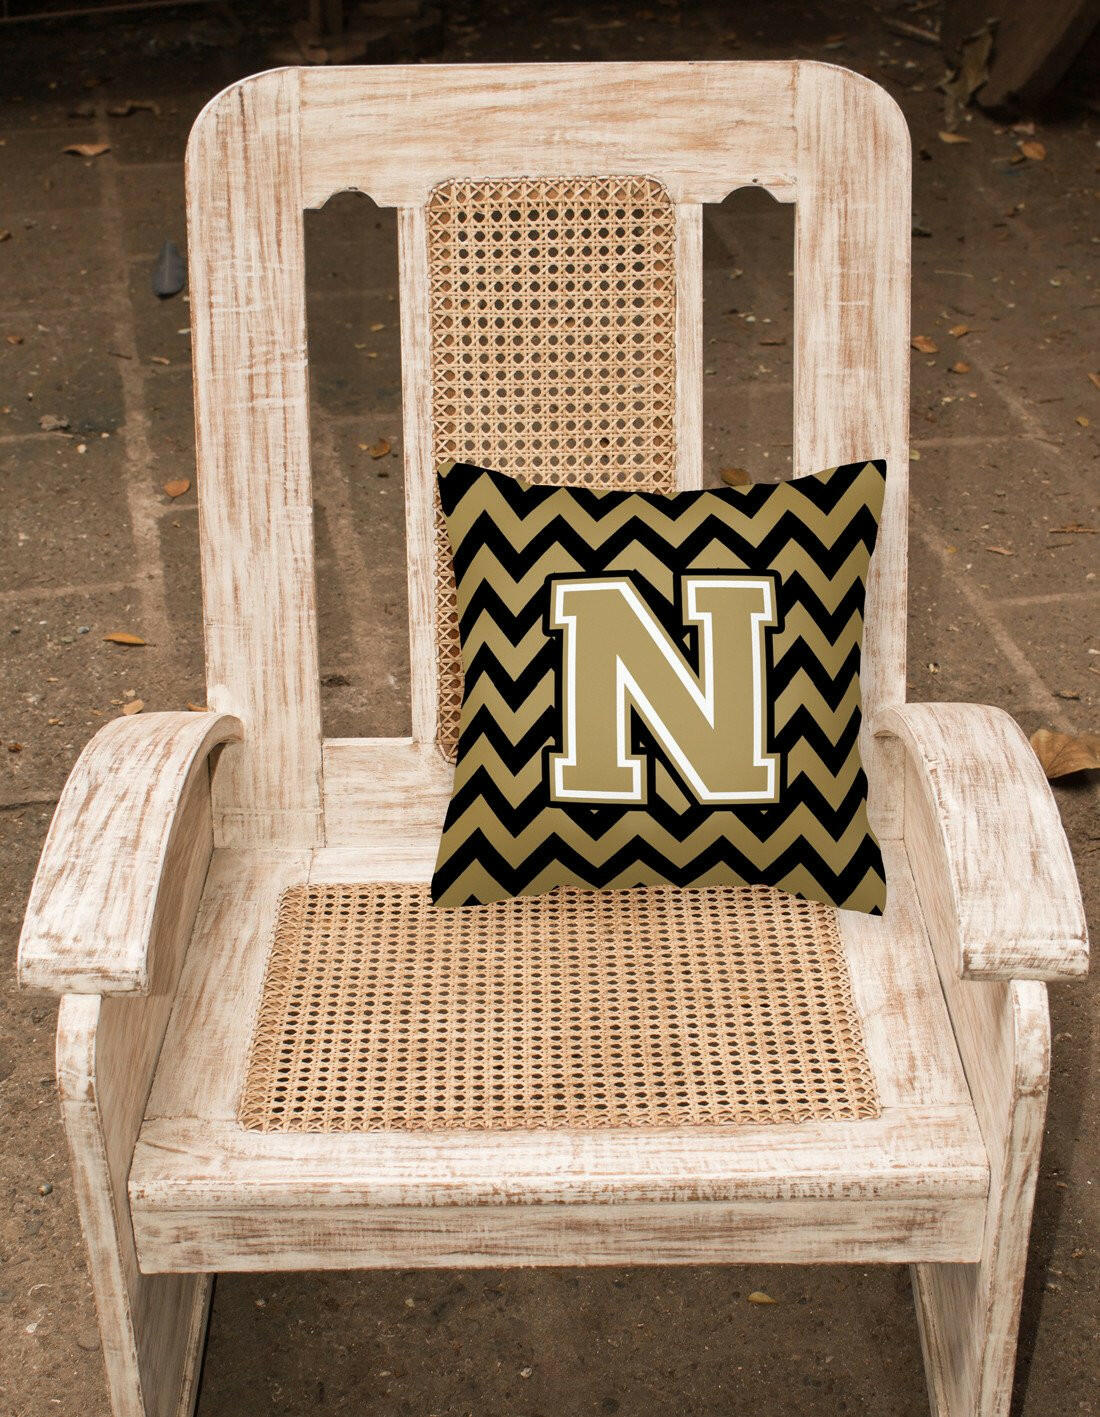 Letter N Chevron Black and Gold  Fabric Decorative Pillow CJ1050-NPW1414 by Caroline's Treasures